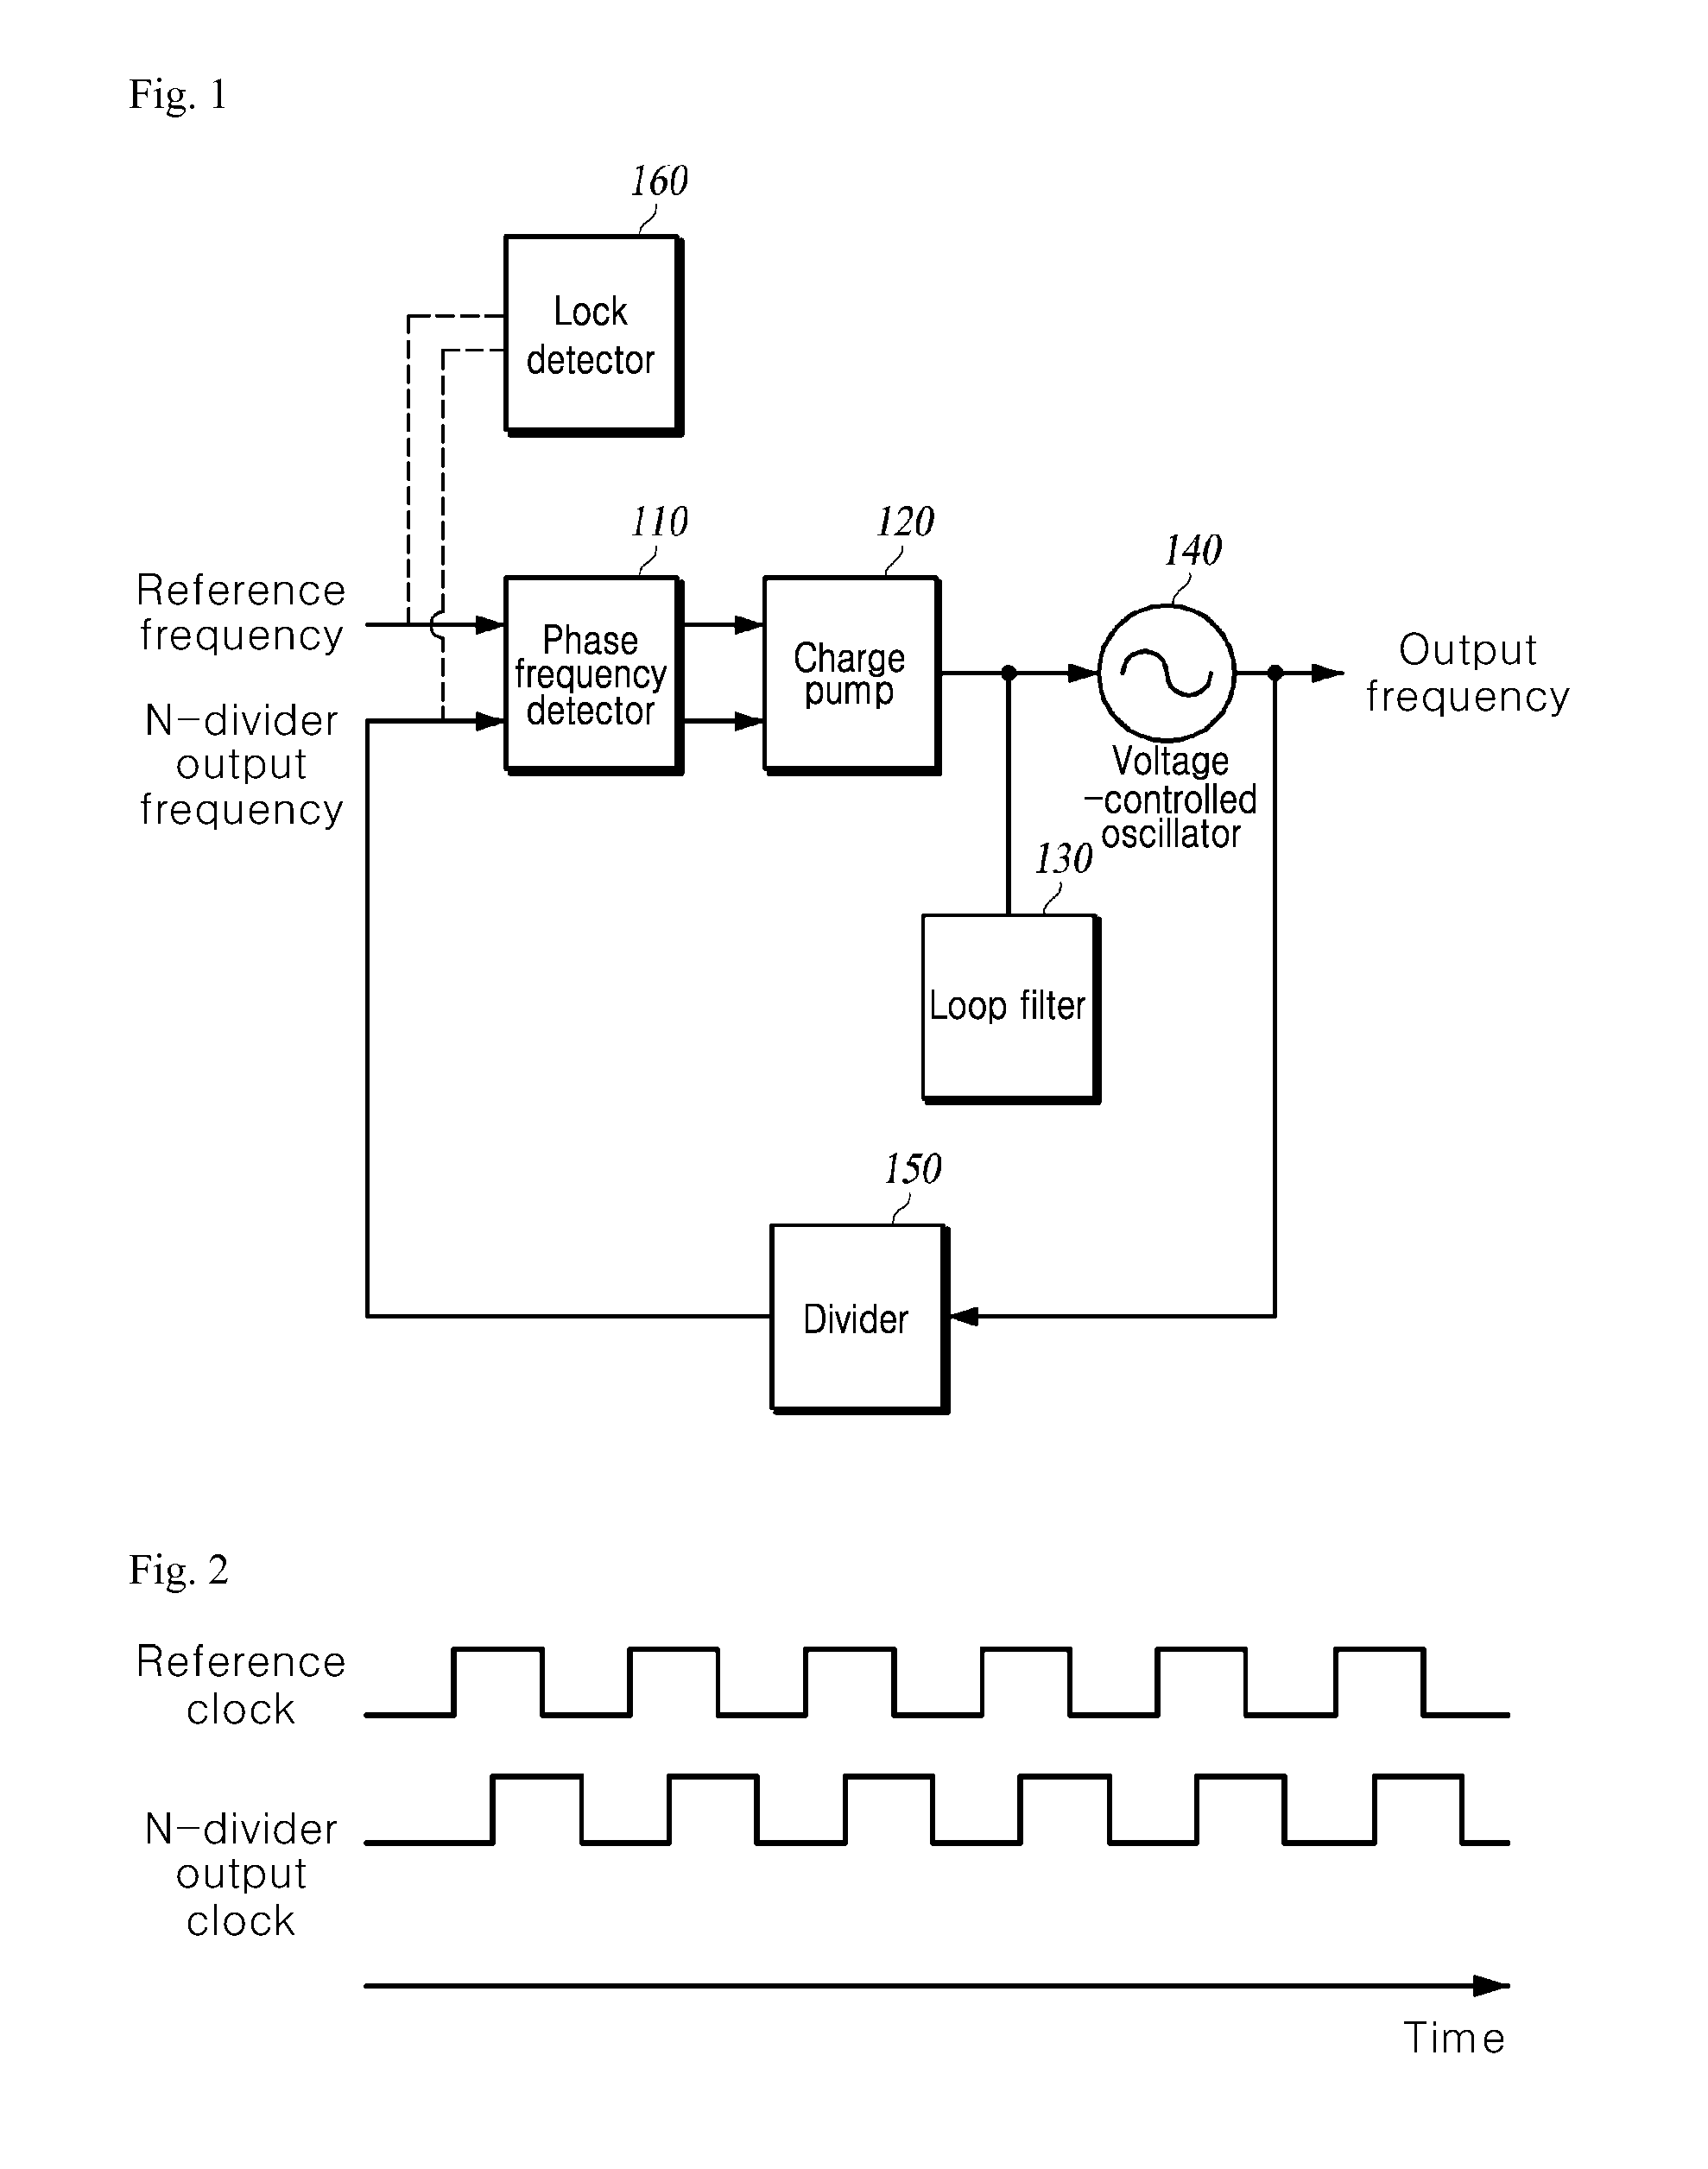 Apparatus for lock detection suitable for fractional-N frequency synthesizer and method thereof